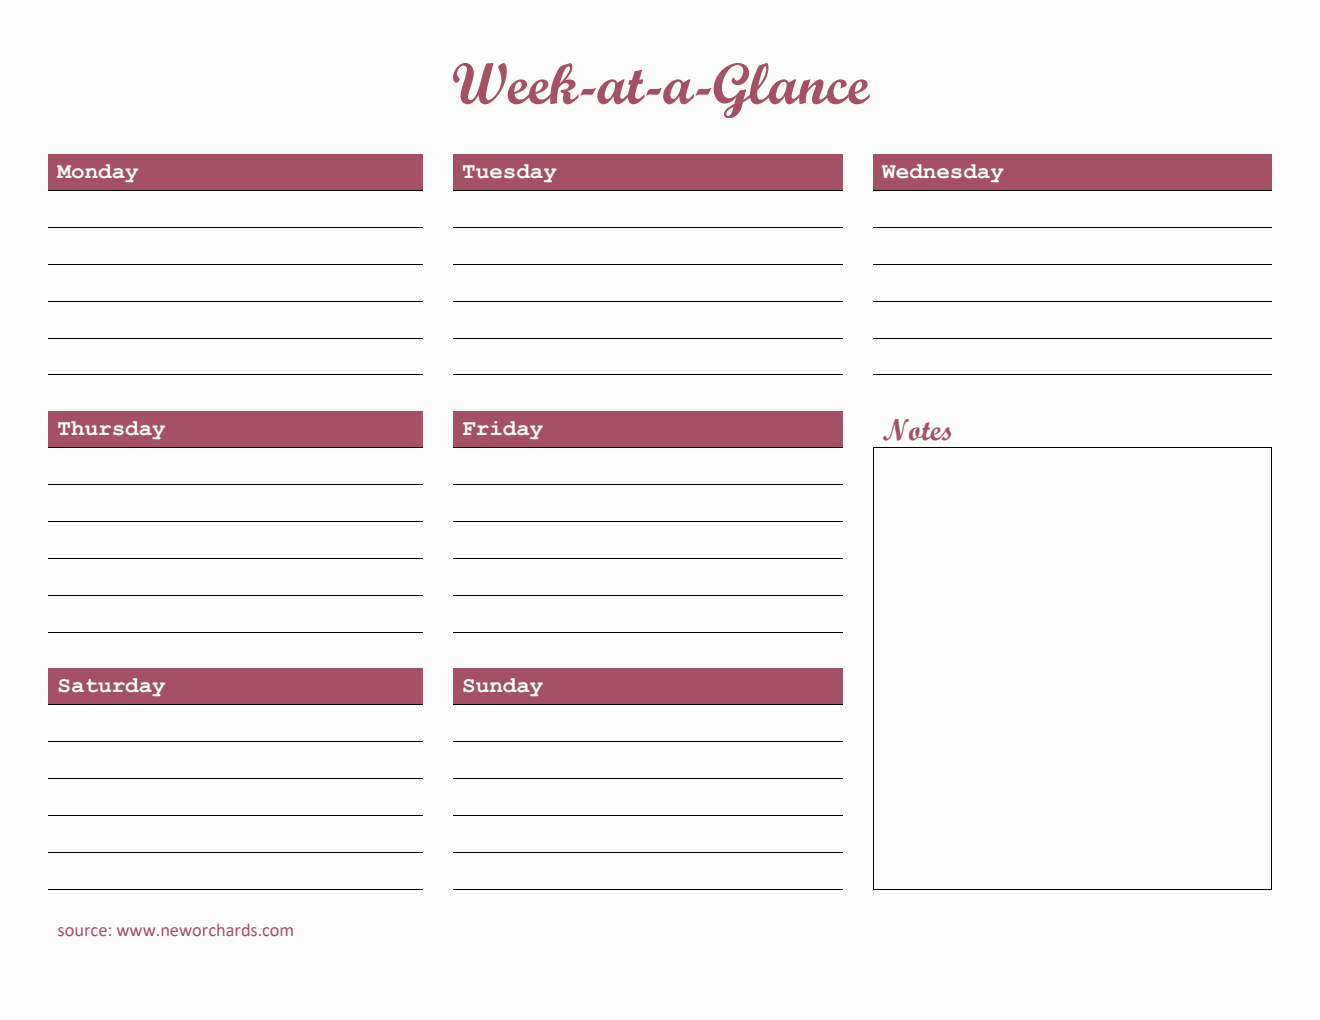 Simple Week at a Glance Template (Word)